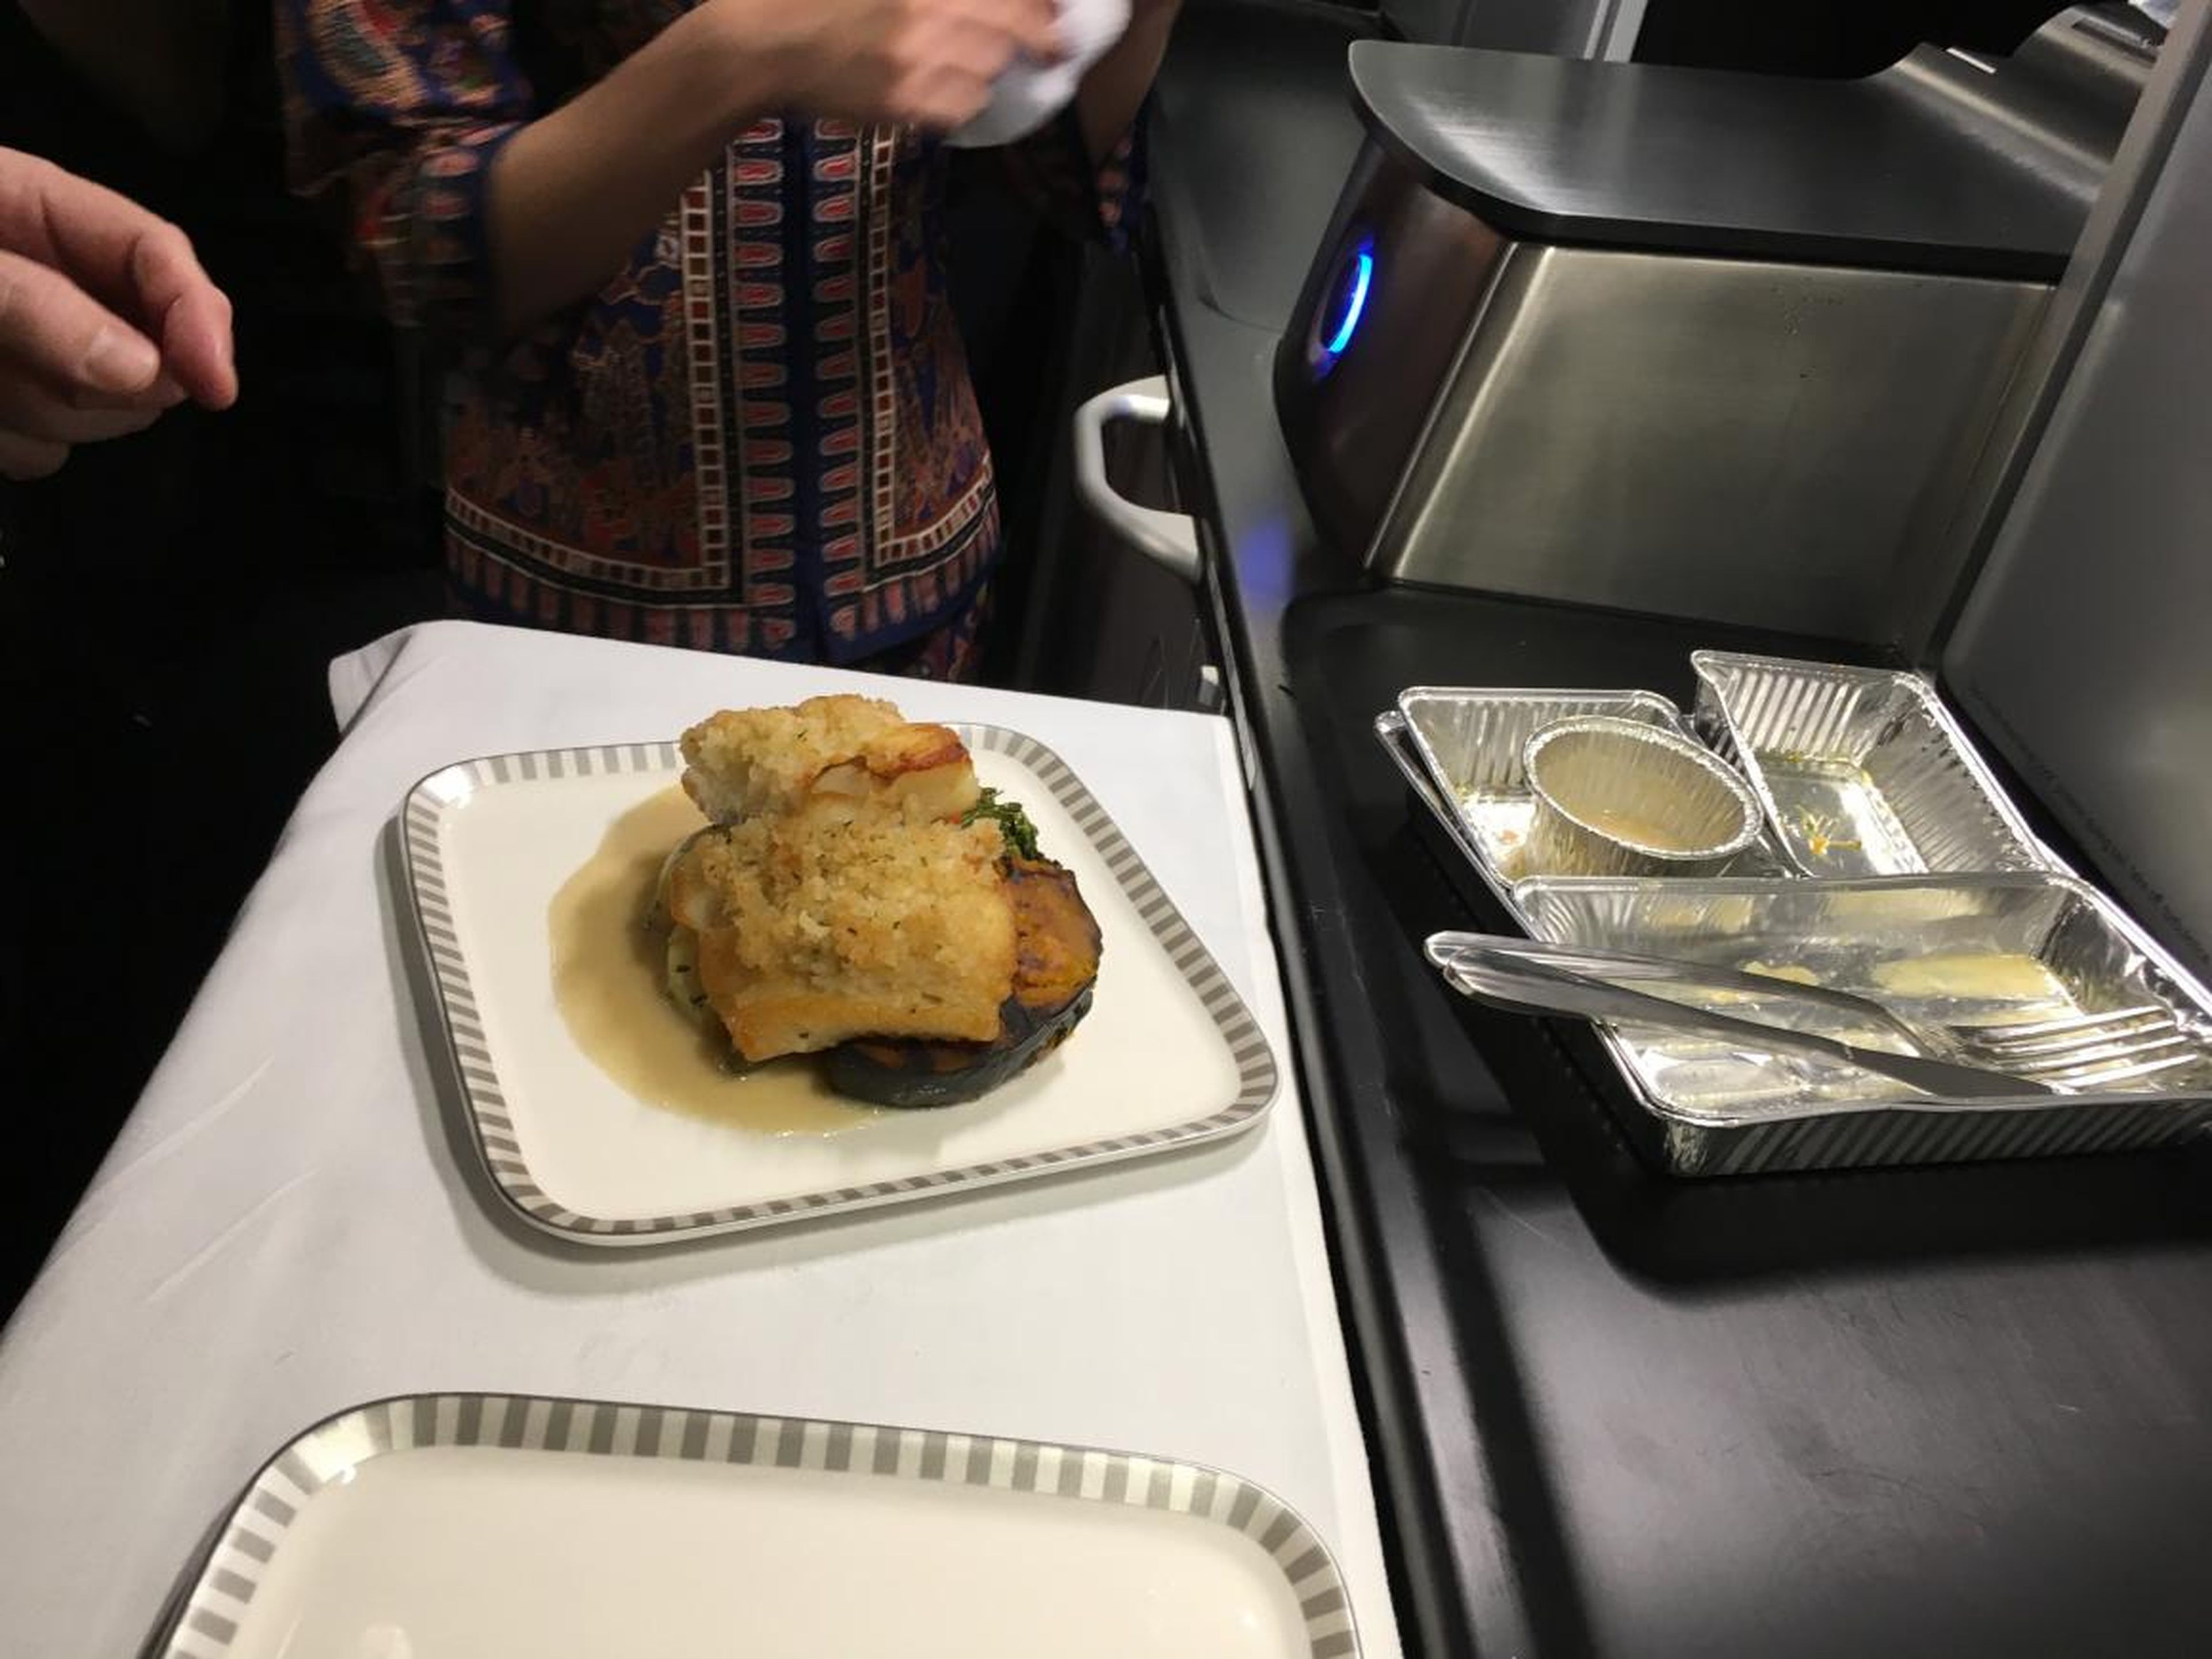 We chatted about the intricacies of delivering fine dining at 40,000 feet. The chef also demonstrated the proper procedure for plating dishes.